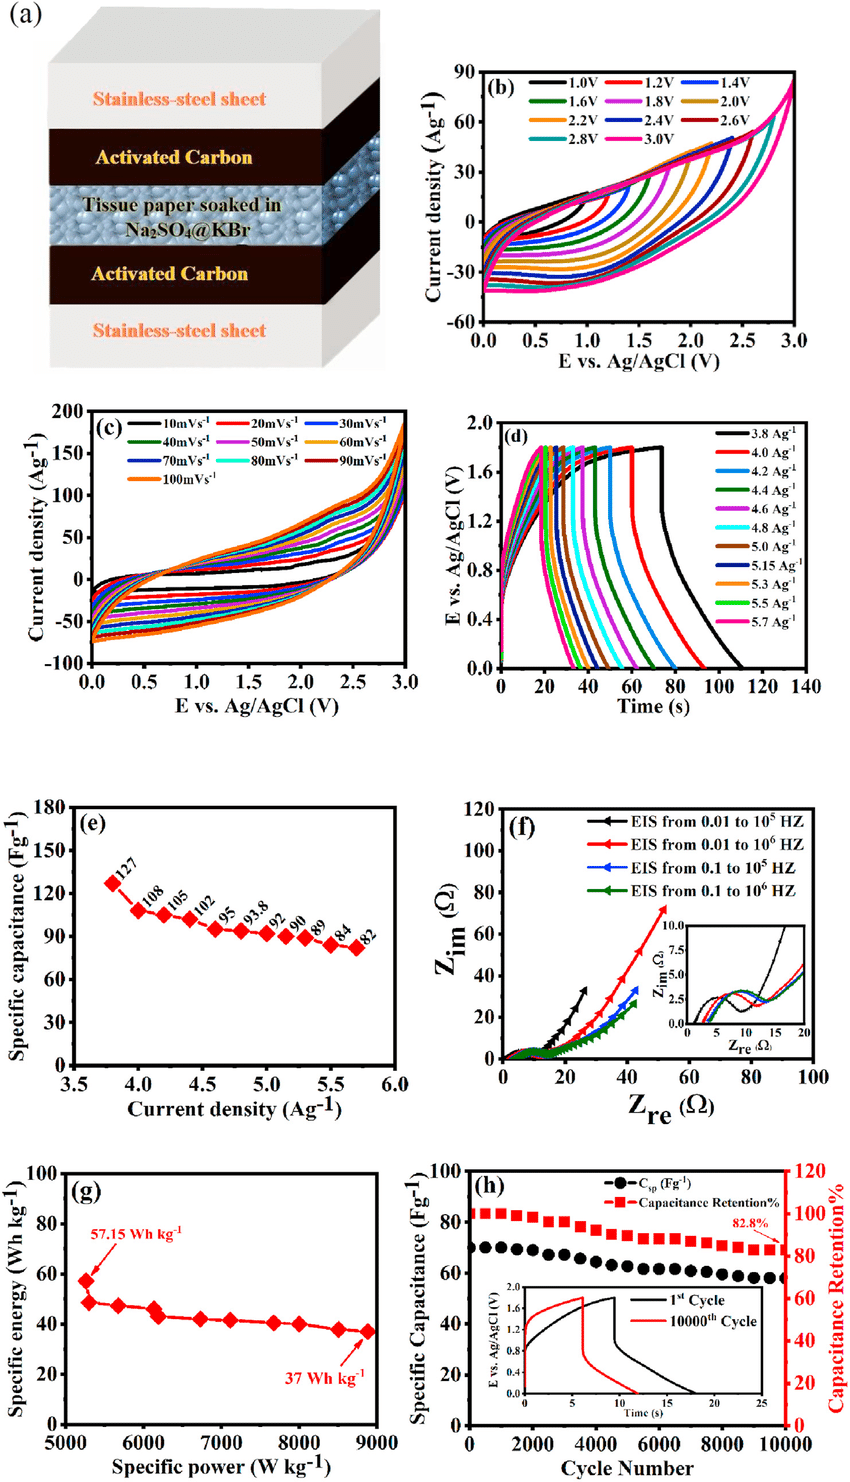 e (a) Schematic design of AC/AC symmetric supercapacitor cell, (b) CV curves in different potential windows at 50 mV s ¡1 , (c) CV curves at various scan rates, (d) GCD curves at various specific currents, (e) C sp at different specific current from 3.8 to 5.7 Ag -1 , (f) Nyquist plots of the AC/AC symmetric supercapacitor cell (g) Ragone plot of the AC/AC symmetric supercapacitor cell (h) cycling stability test for AC/AC symmetric supercapacitor cell at 7 A g ¡1 .